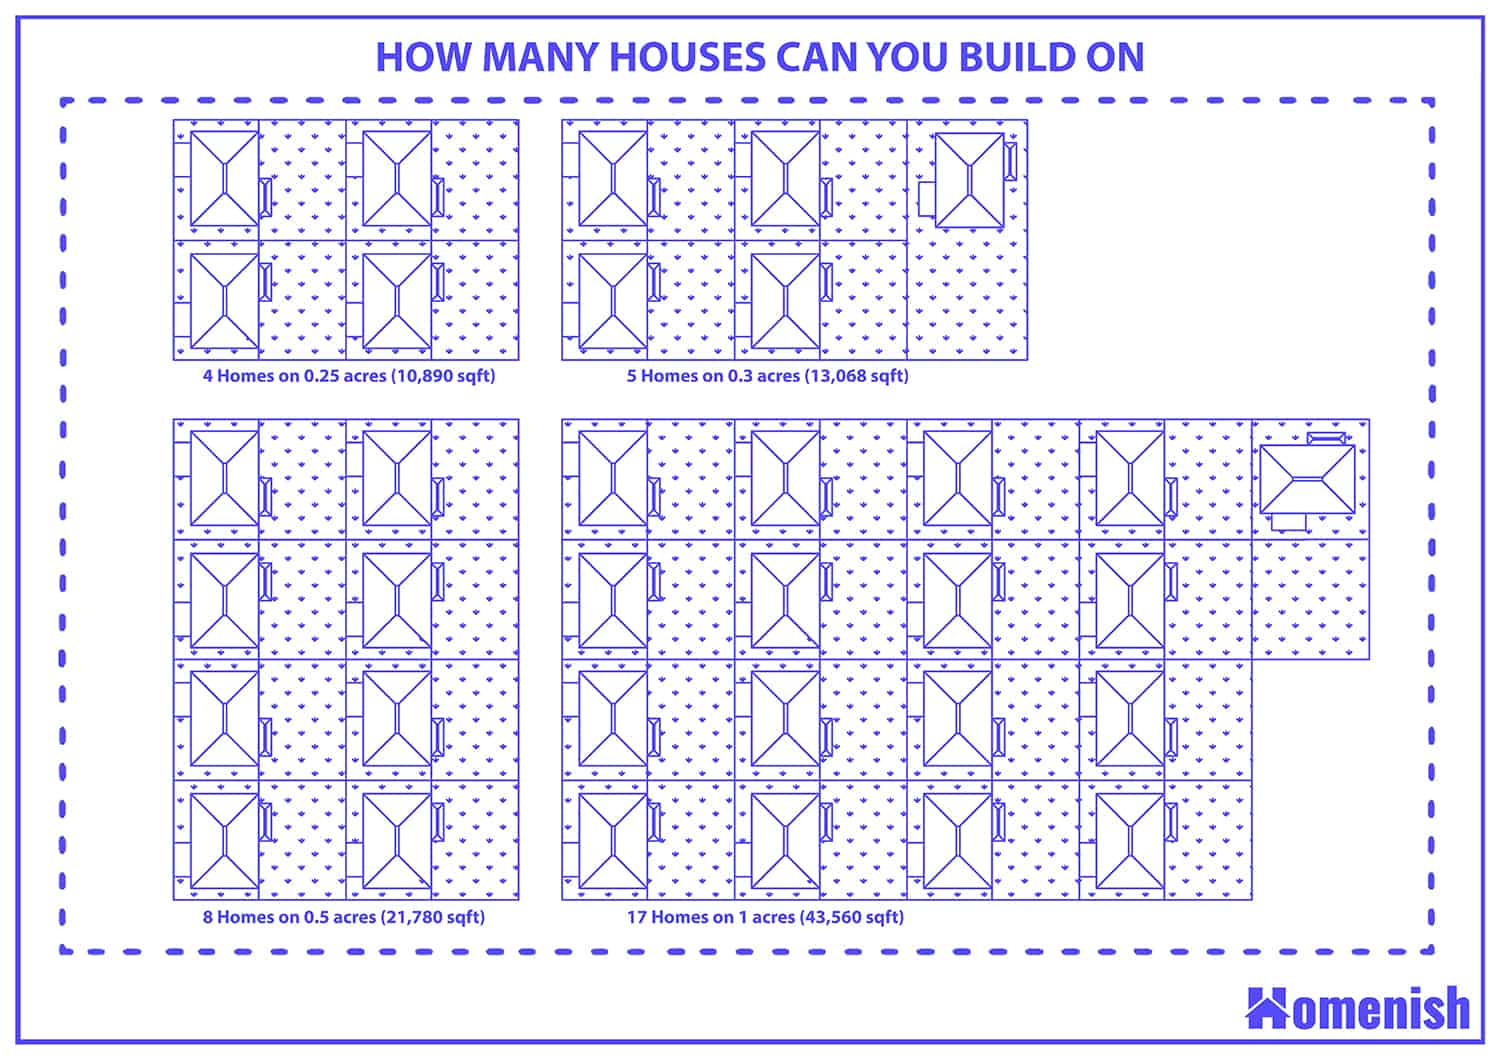 How many houses can you build on?